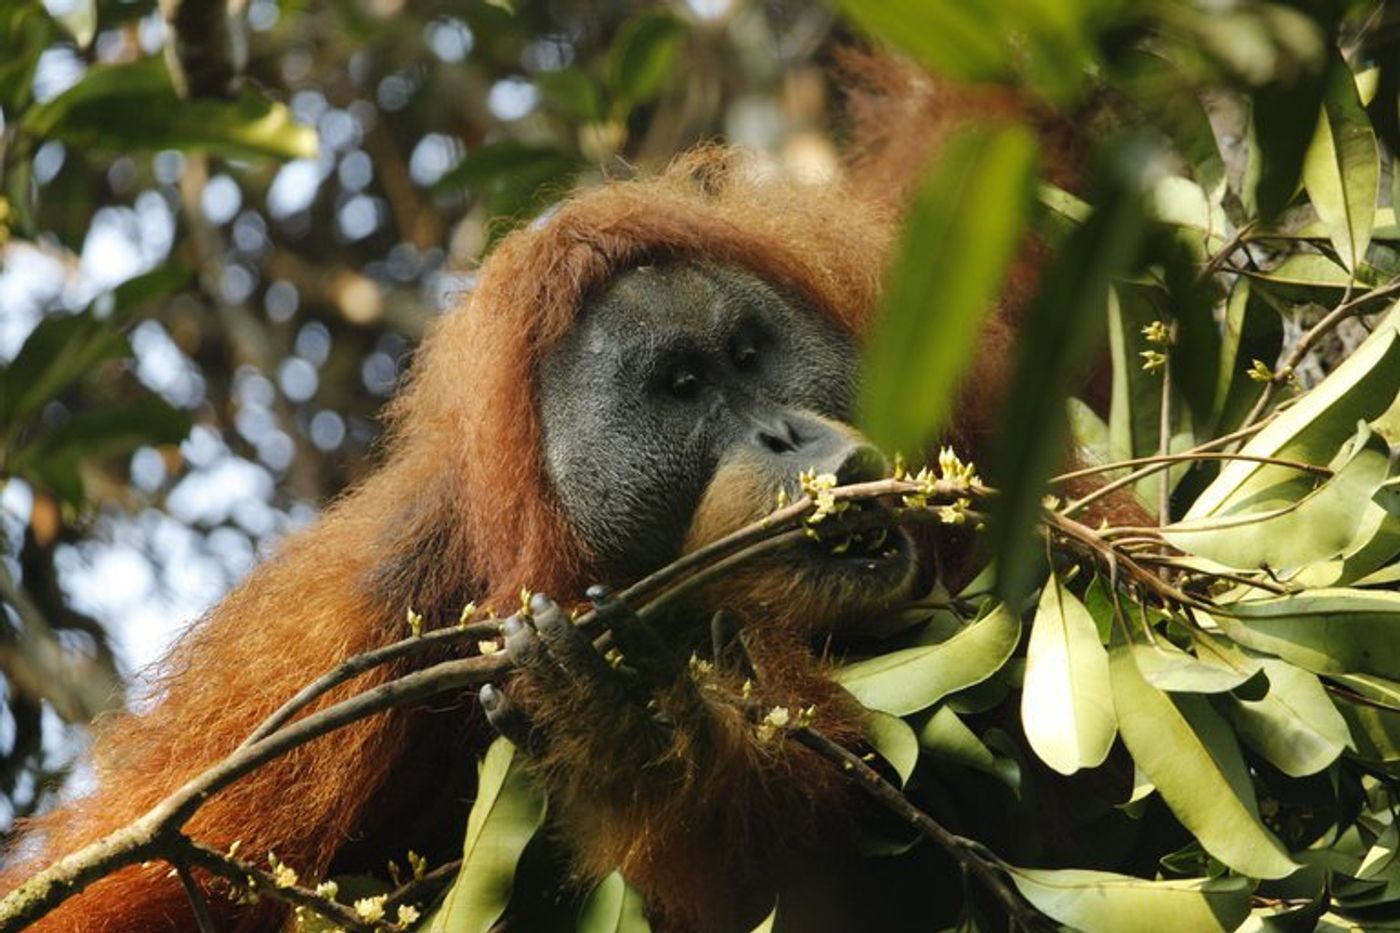 An adult male Tapanuli orangutan is pictured.